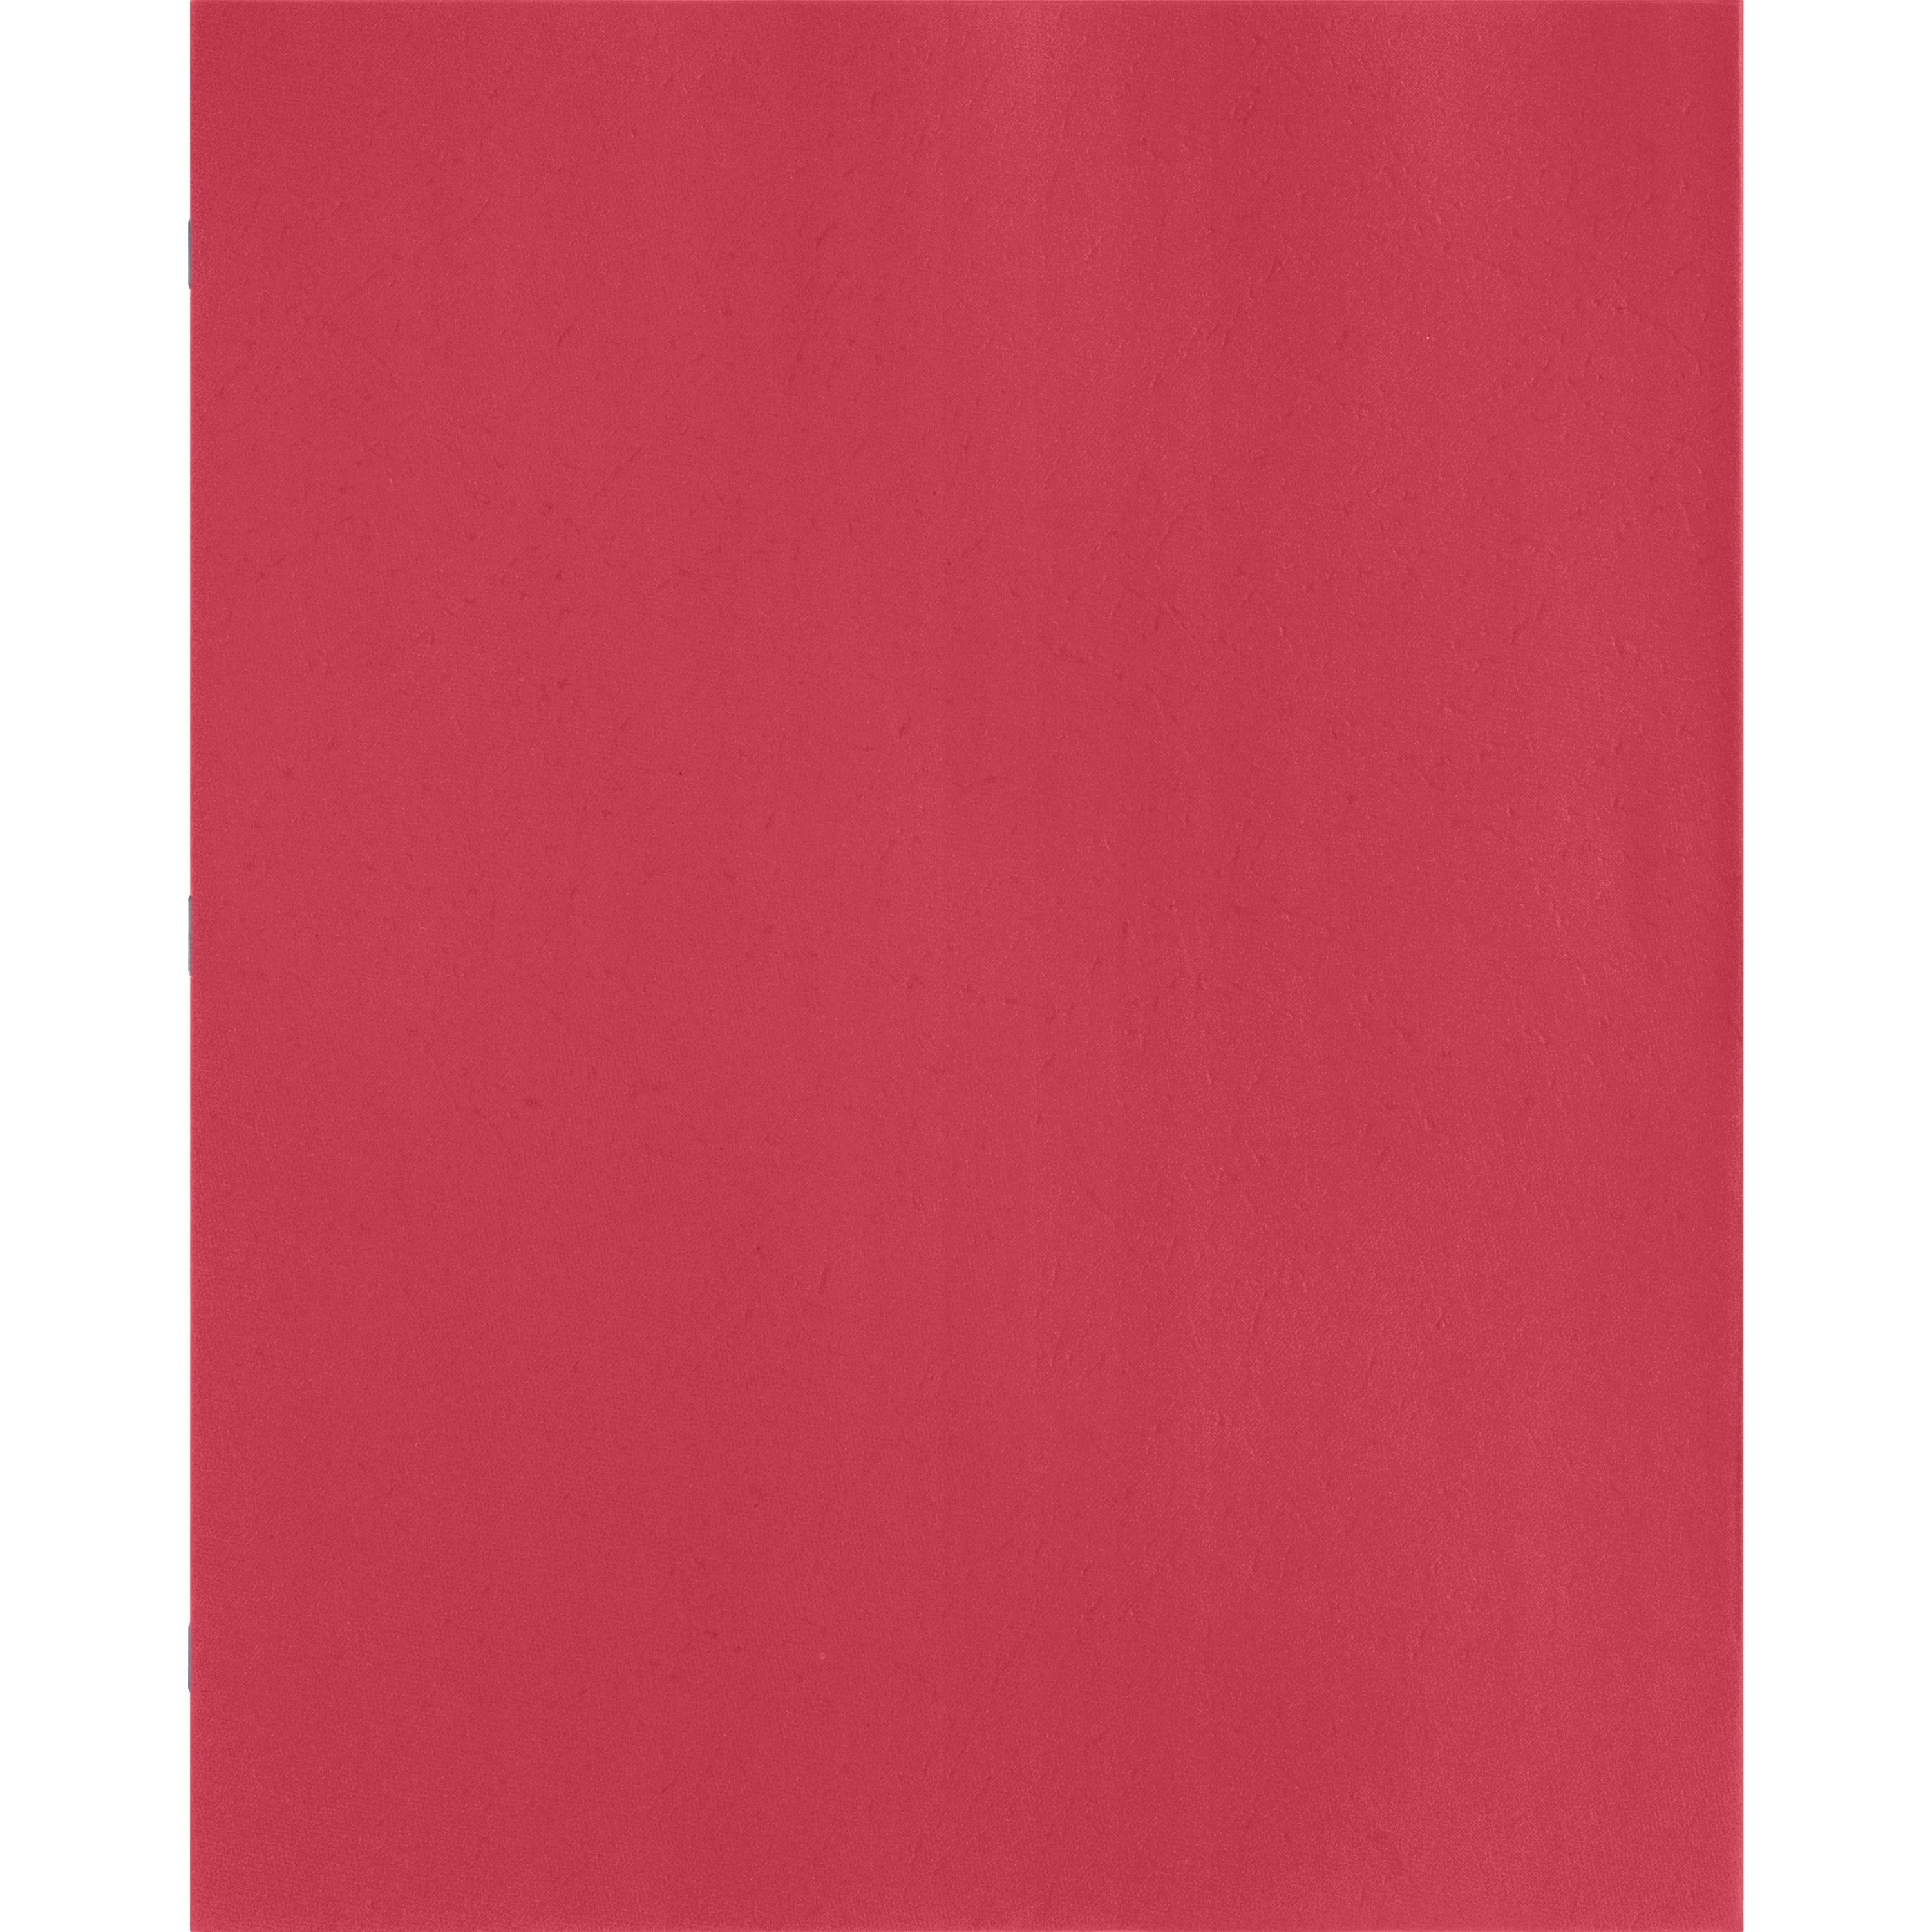 Business Source Letter Recycled Pocket Folder - 8 1/2" x 11" - 100 Sheet Capacity - 3 x Prong Fastener(s) - 1/2" Fastener Capacity - 2 Inside Front & Back Pocket(s) - Leatherette - Red - 35% Recycled - 25 / Box - 